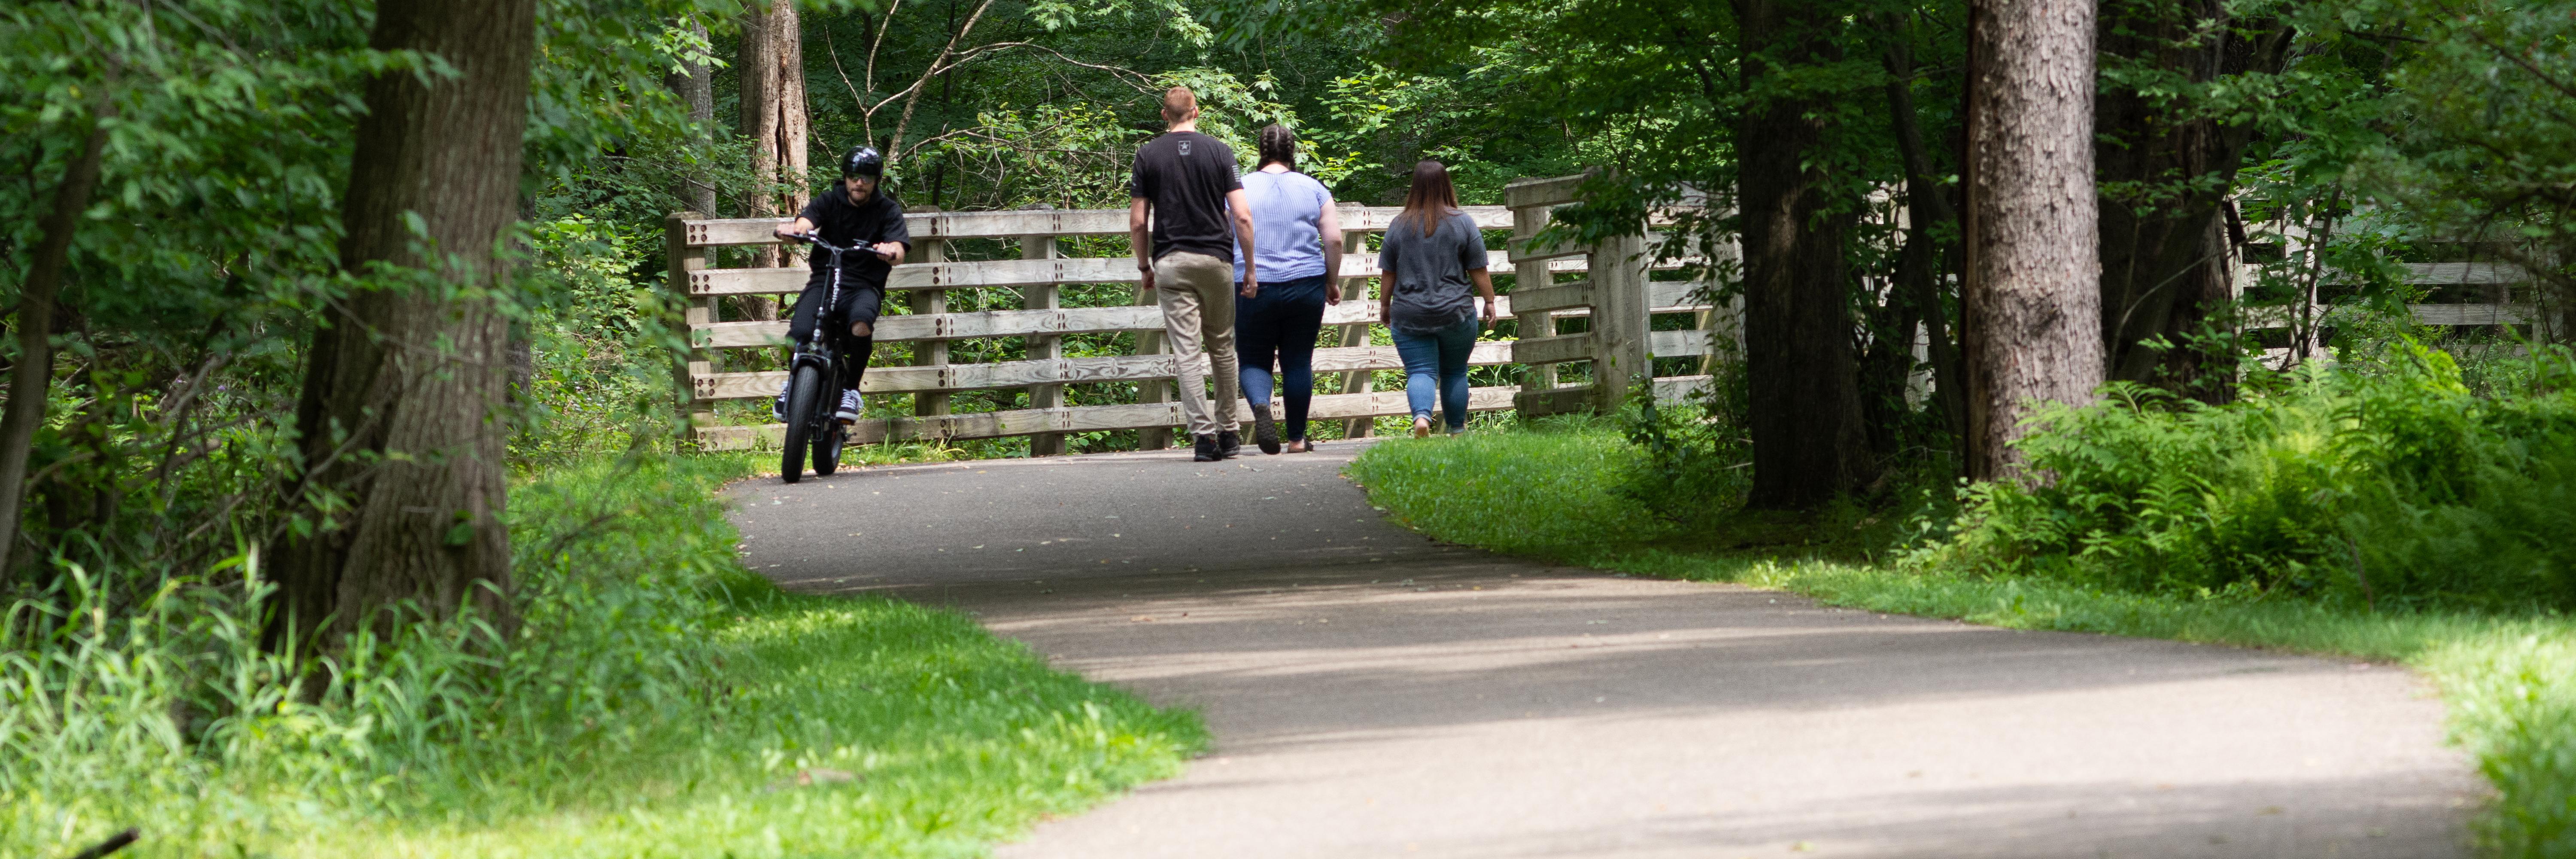 Bicyclist and walkers on the Allegheny River Valley Trail